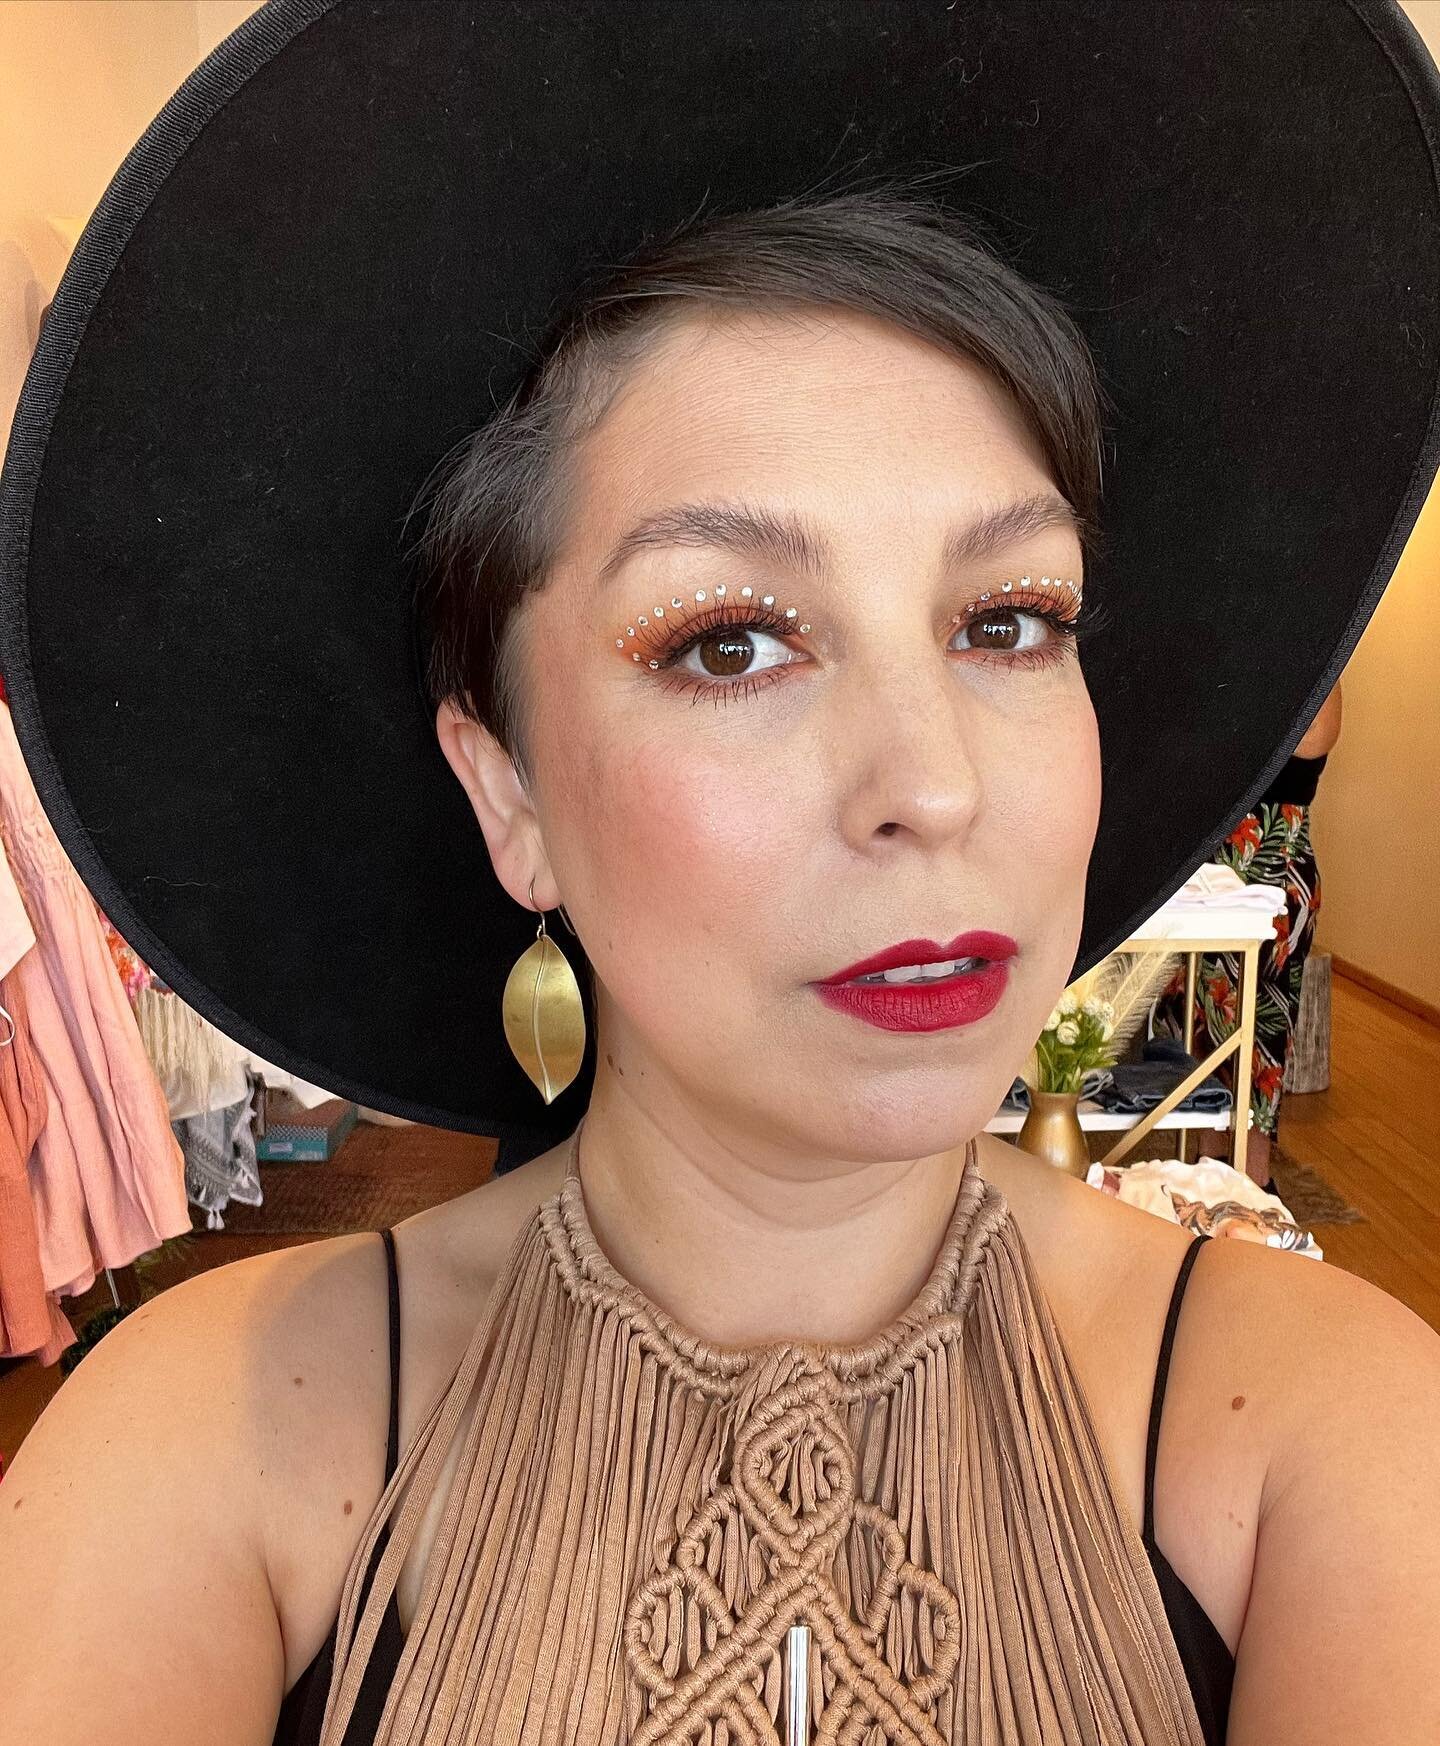 Glitta and rhinestones for a simple, Coachella look. Fun &ldquo;NoChella&rdquo; event at @wyldflwr.beautyboutique ! Happy 1st anniversary!!

#coachellamakeup #glitta #rhinestones #funmakeup #fantasymakeup #wyldflwr #boutiqueday #promakeup #nofilter #